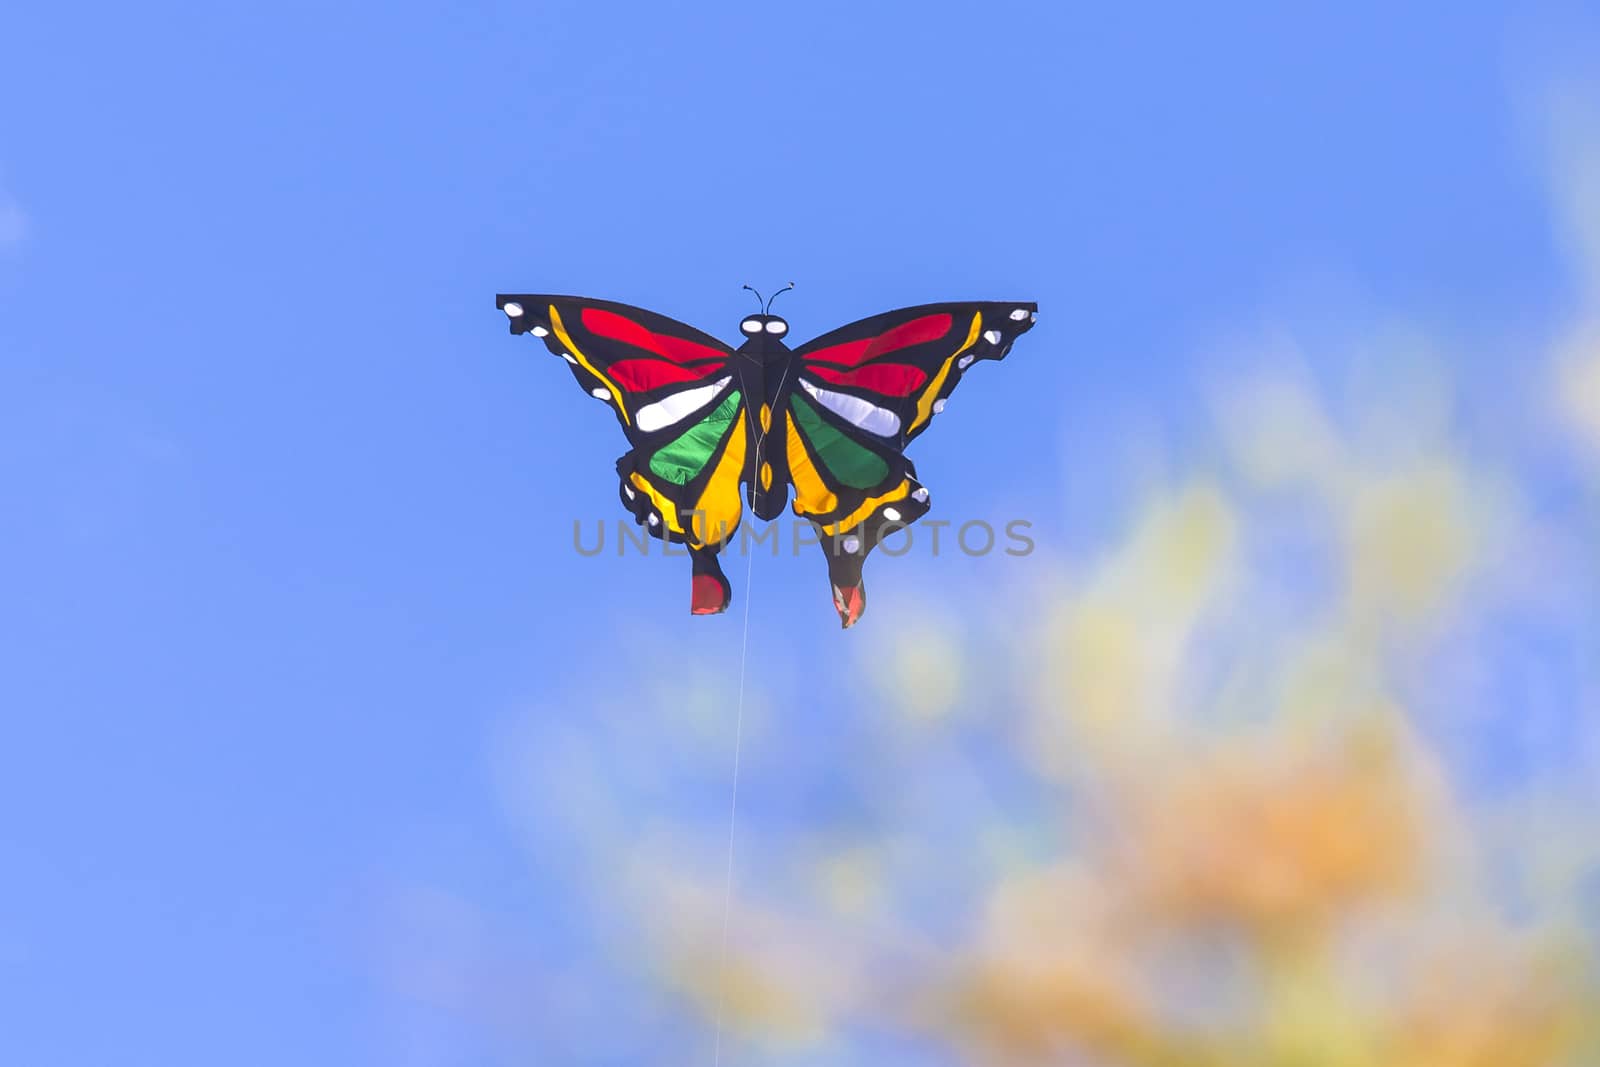 Colorful Kite Butterfly Flying in Blue Sky.